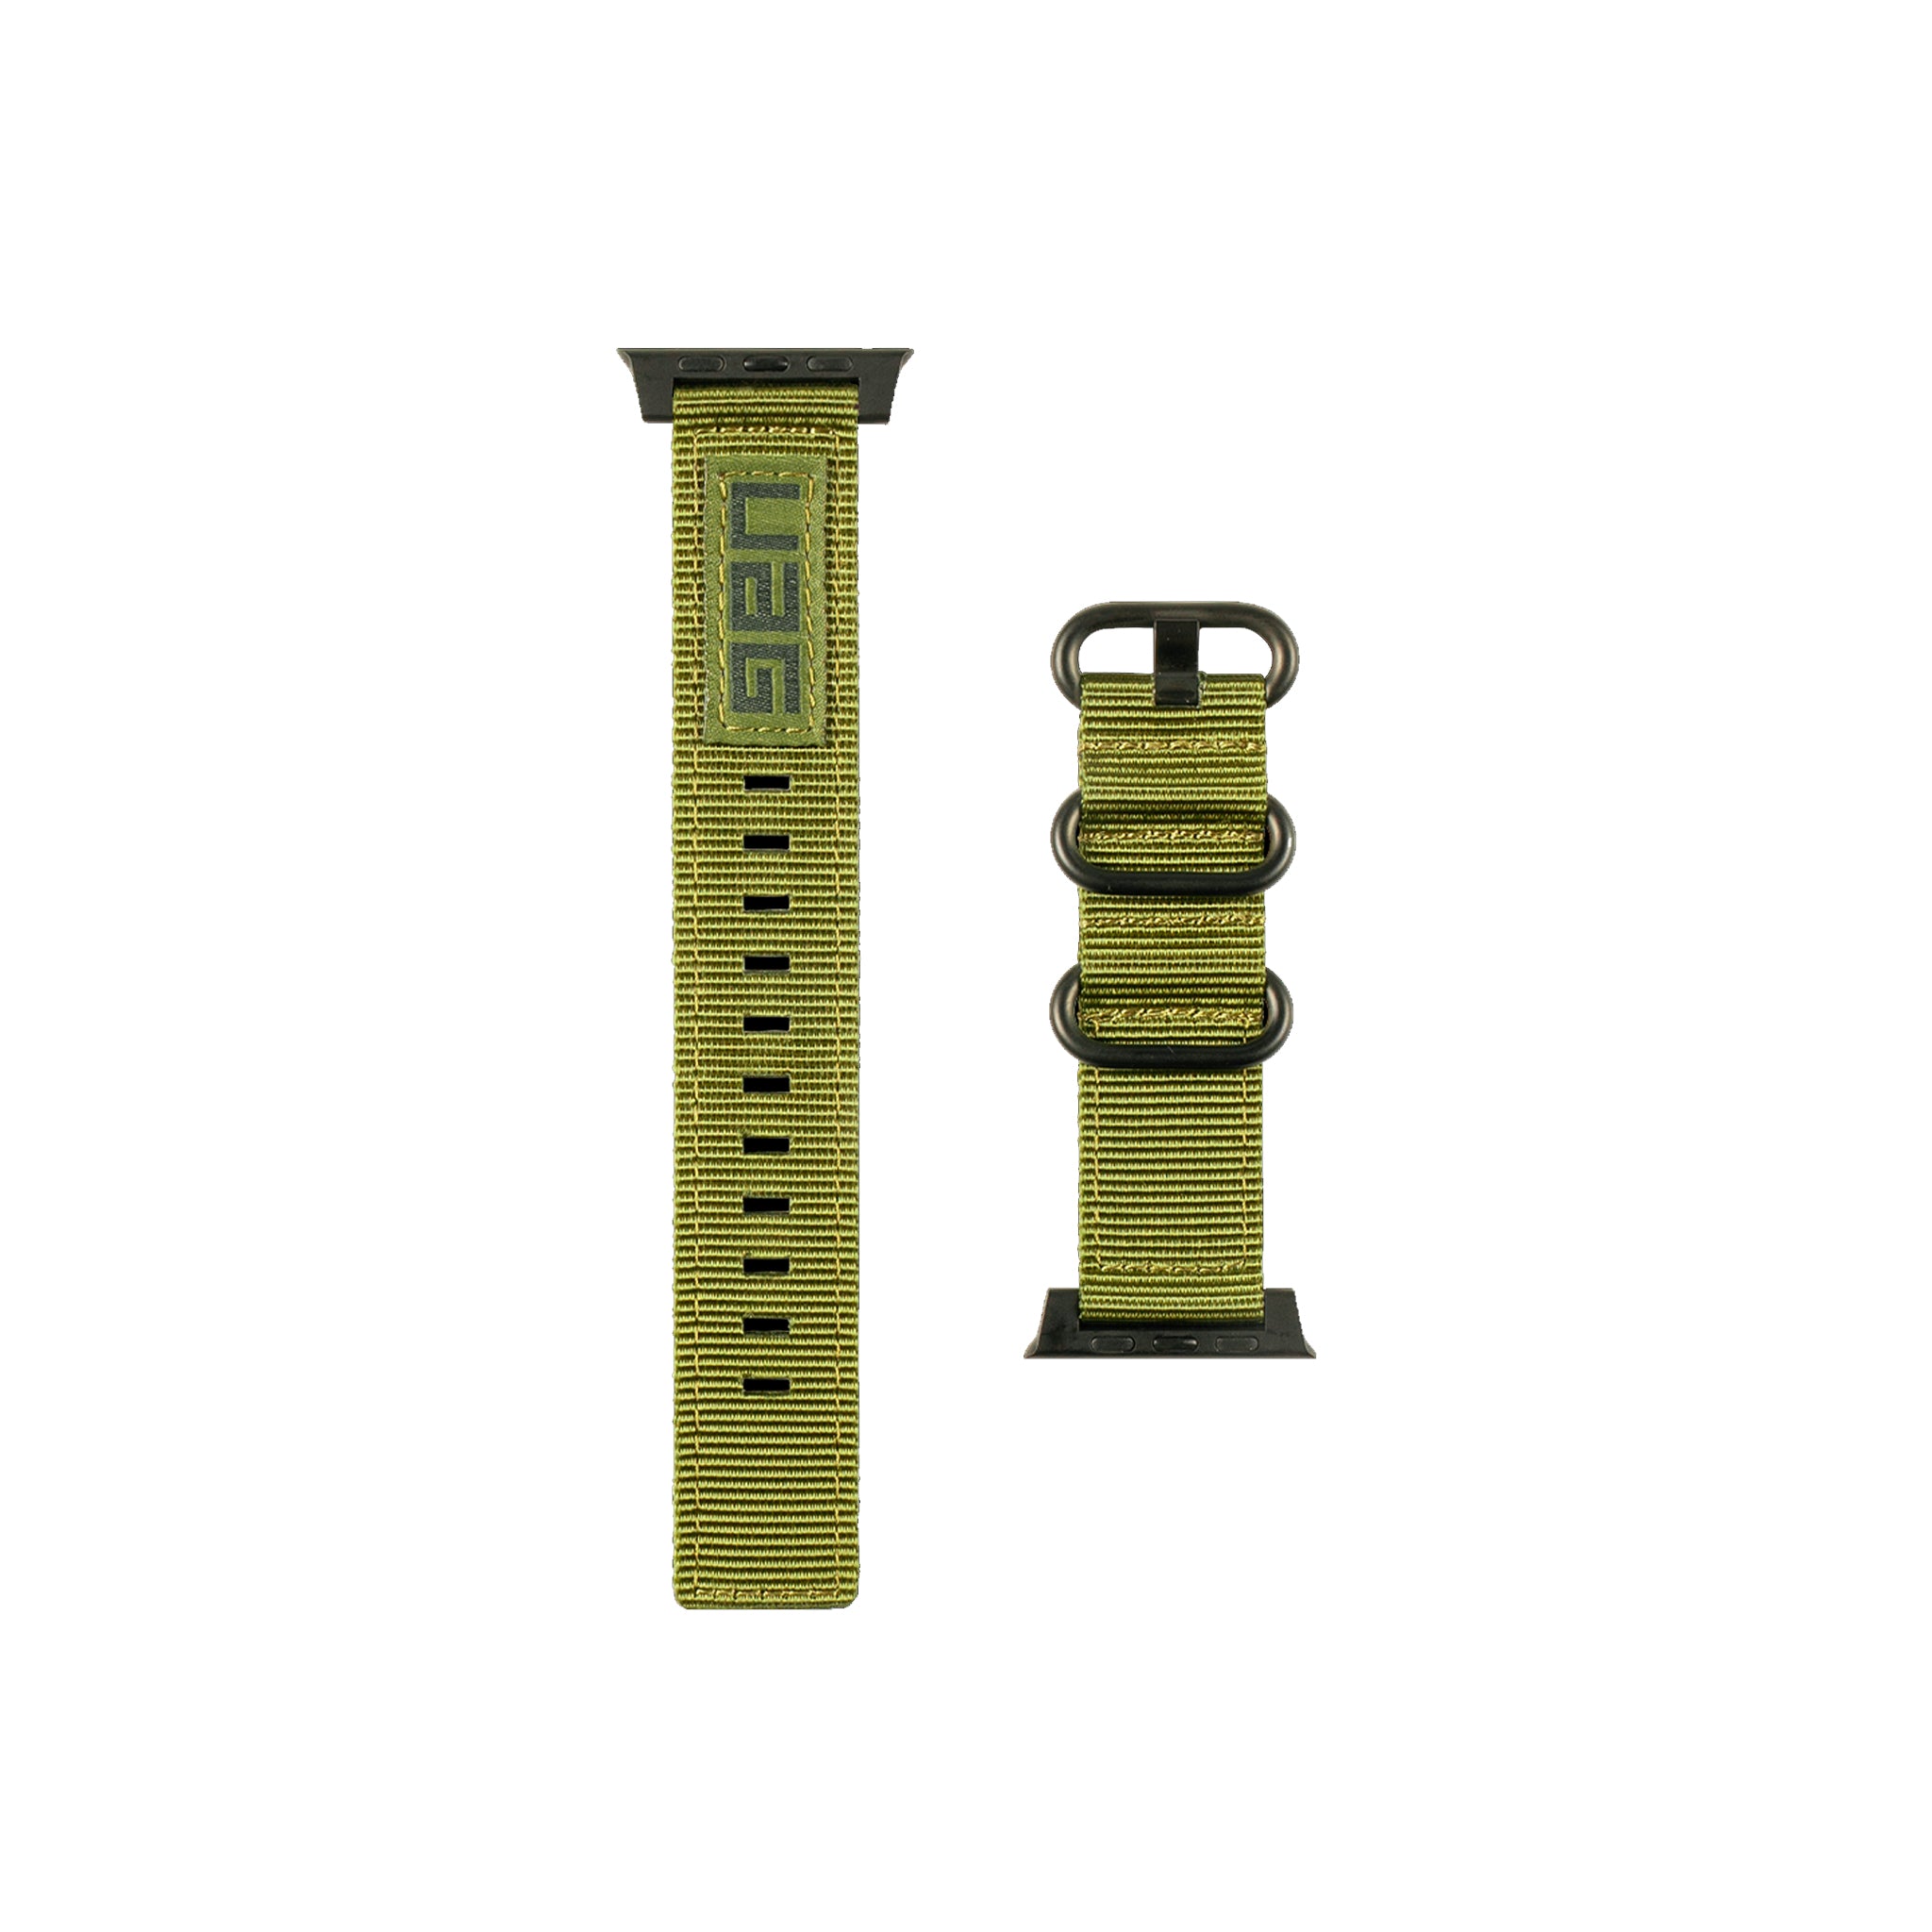 Urban Armor Gear (uag) - Nato Watchband For Apple Watch 42mm / 44mm - Olive Drab